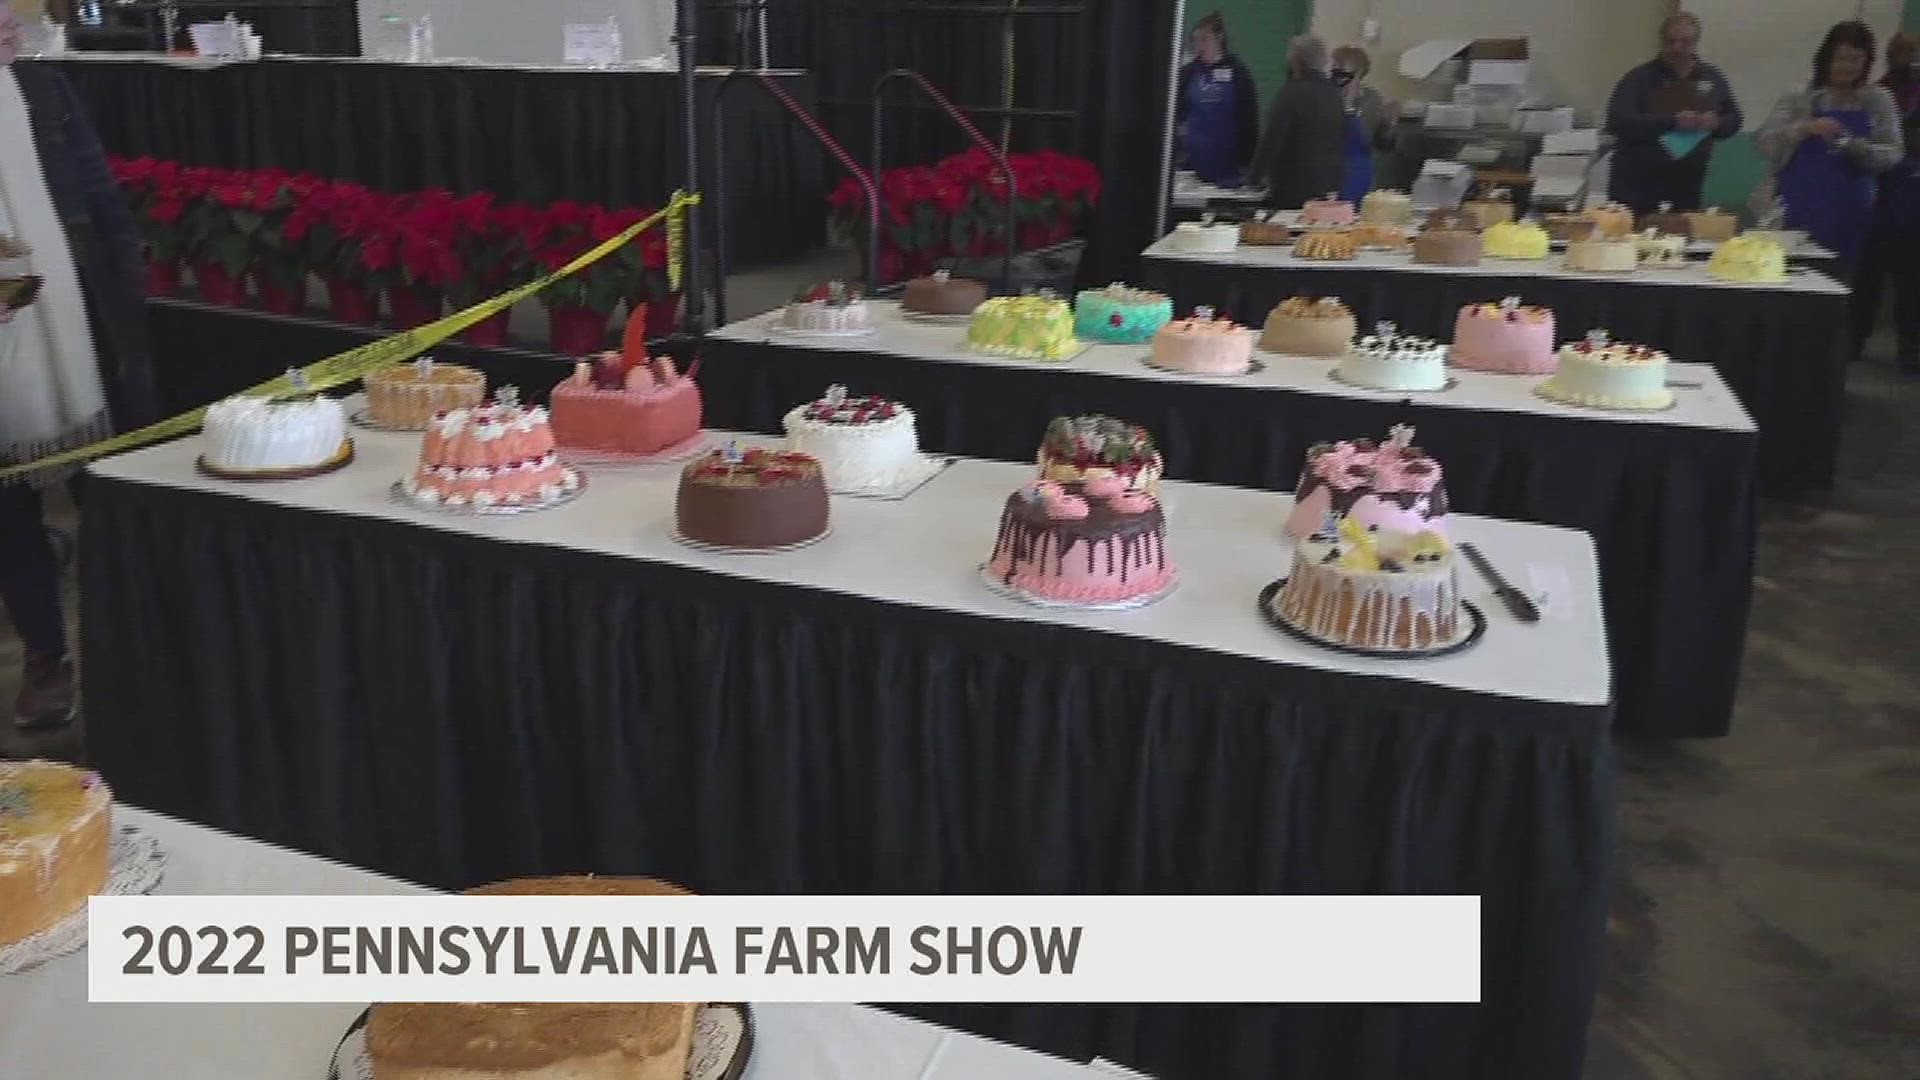 An array of exhibits, sweet and savory treats, and rich agriculture: the 2022 Pa. Farm Show is open until Jan. 15.